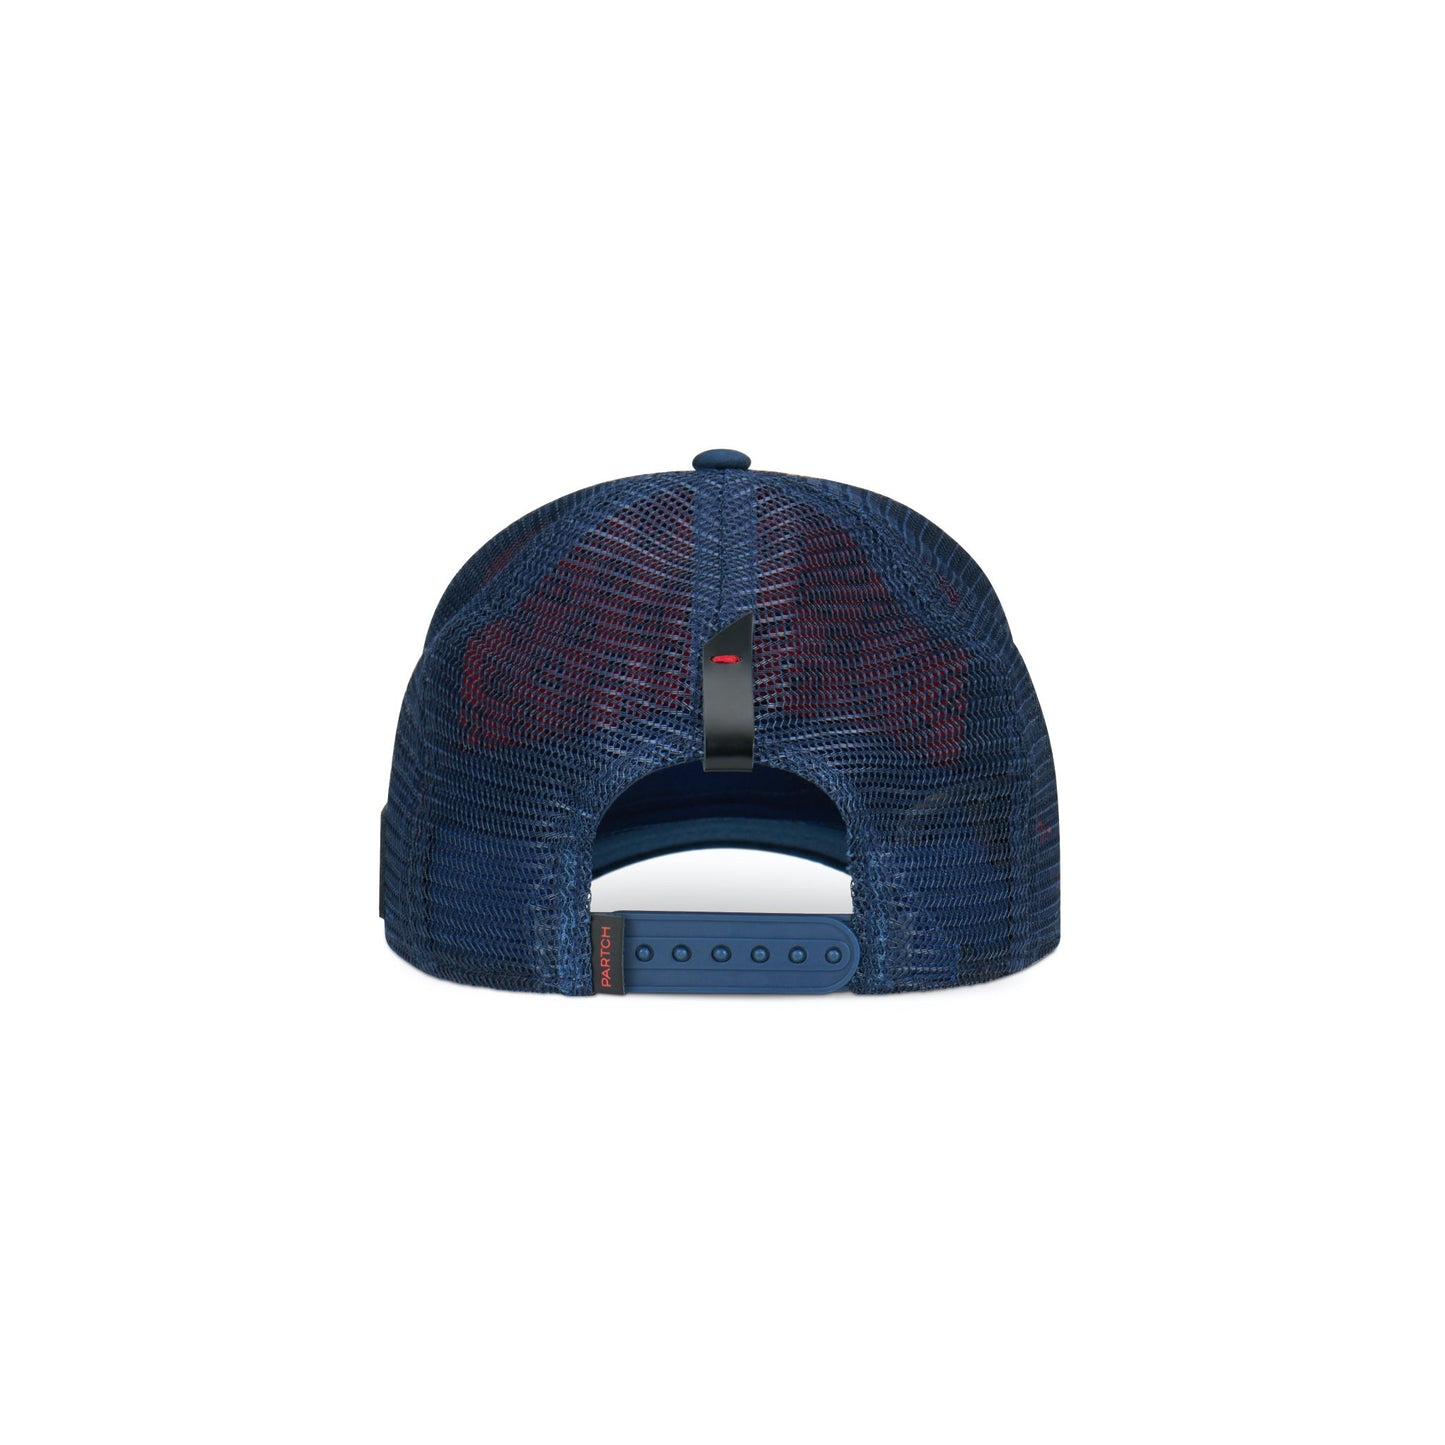 Navy blue back view trucker hat by PARTCH and Didier Devaux made in Miami